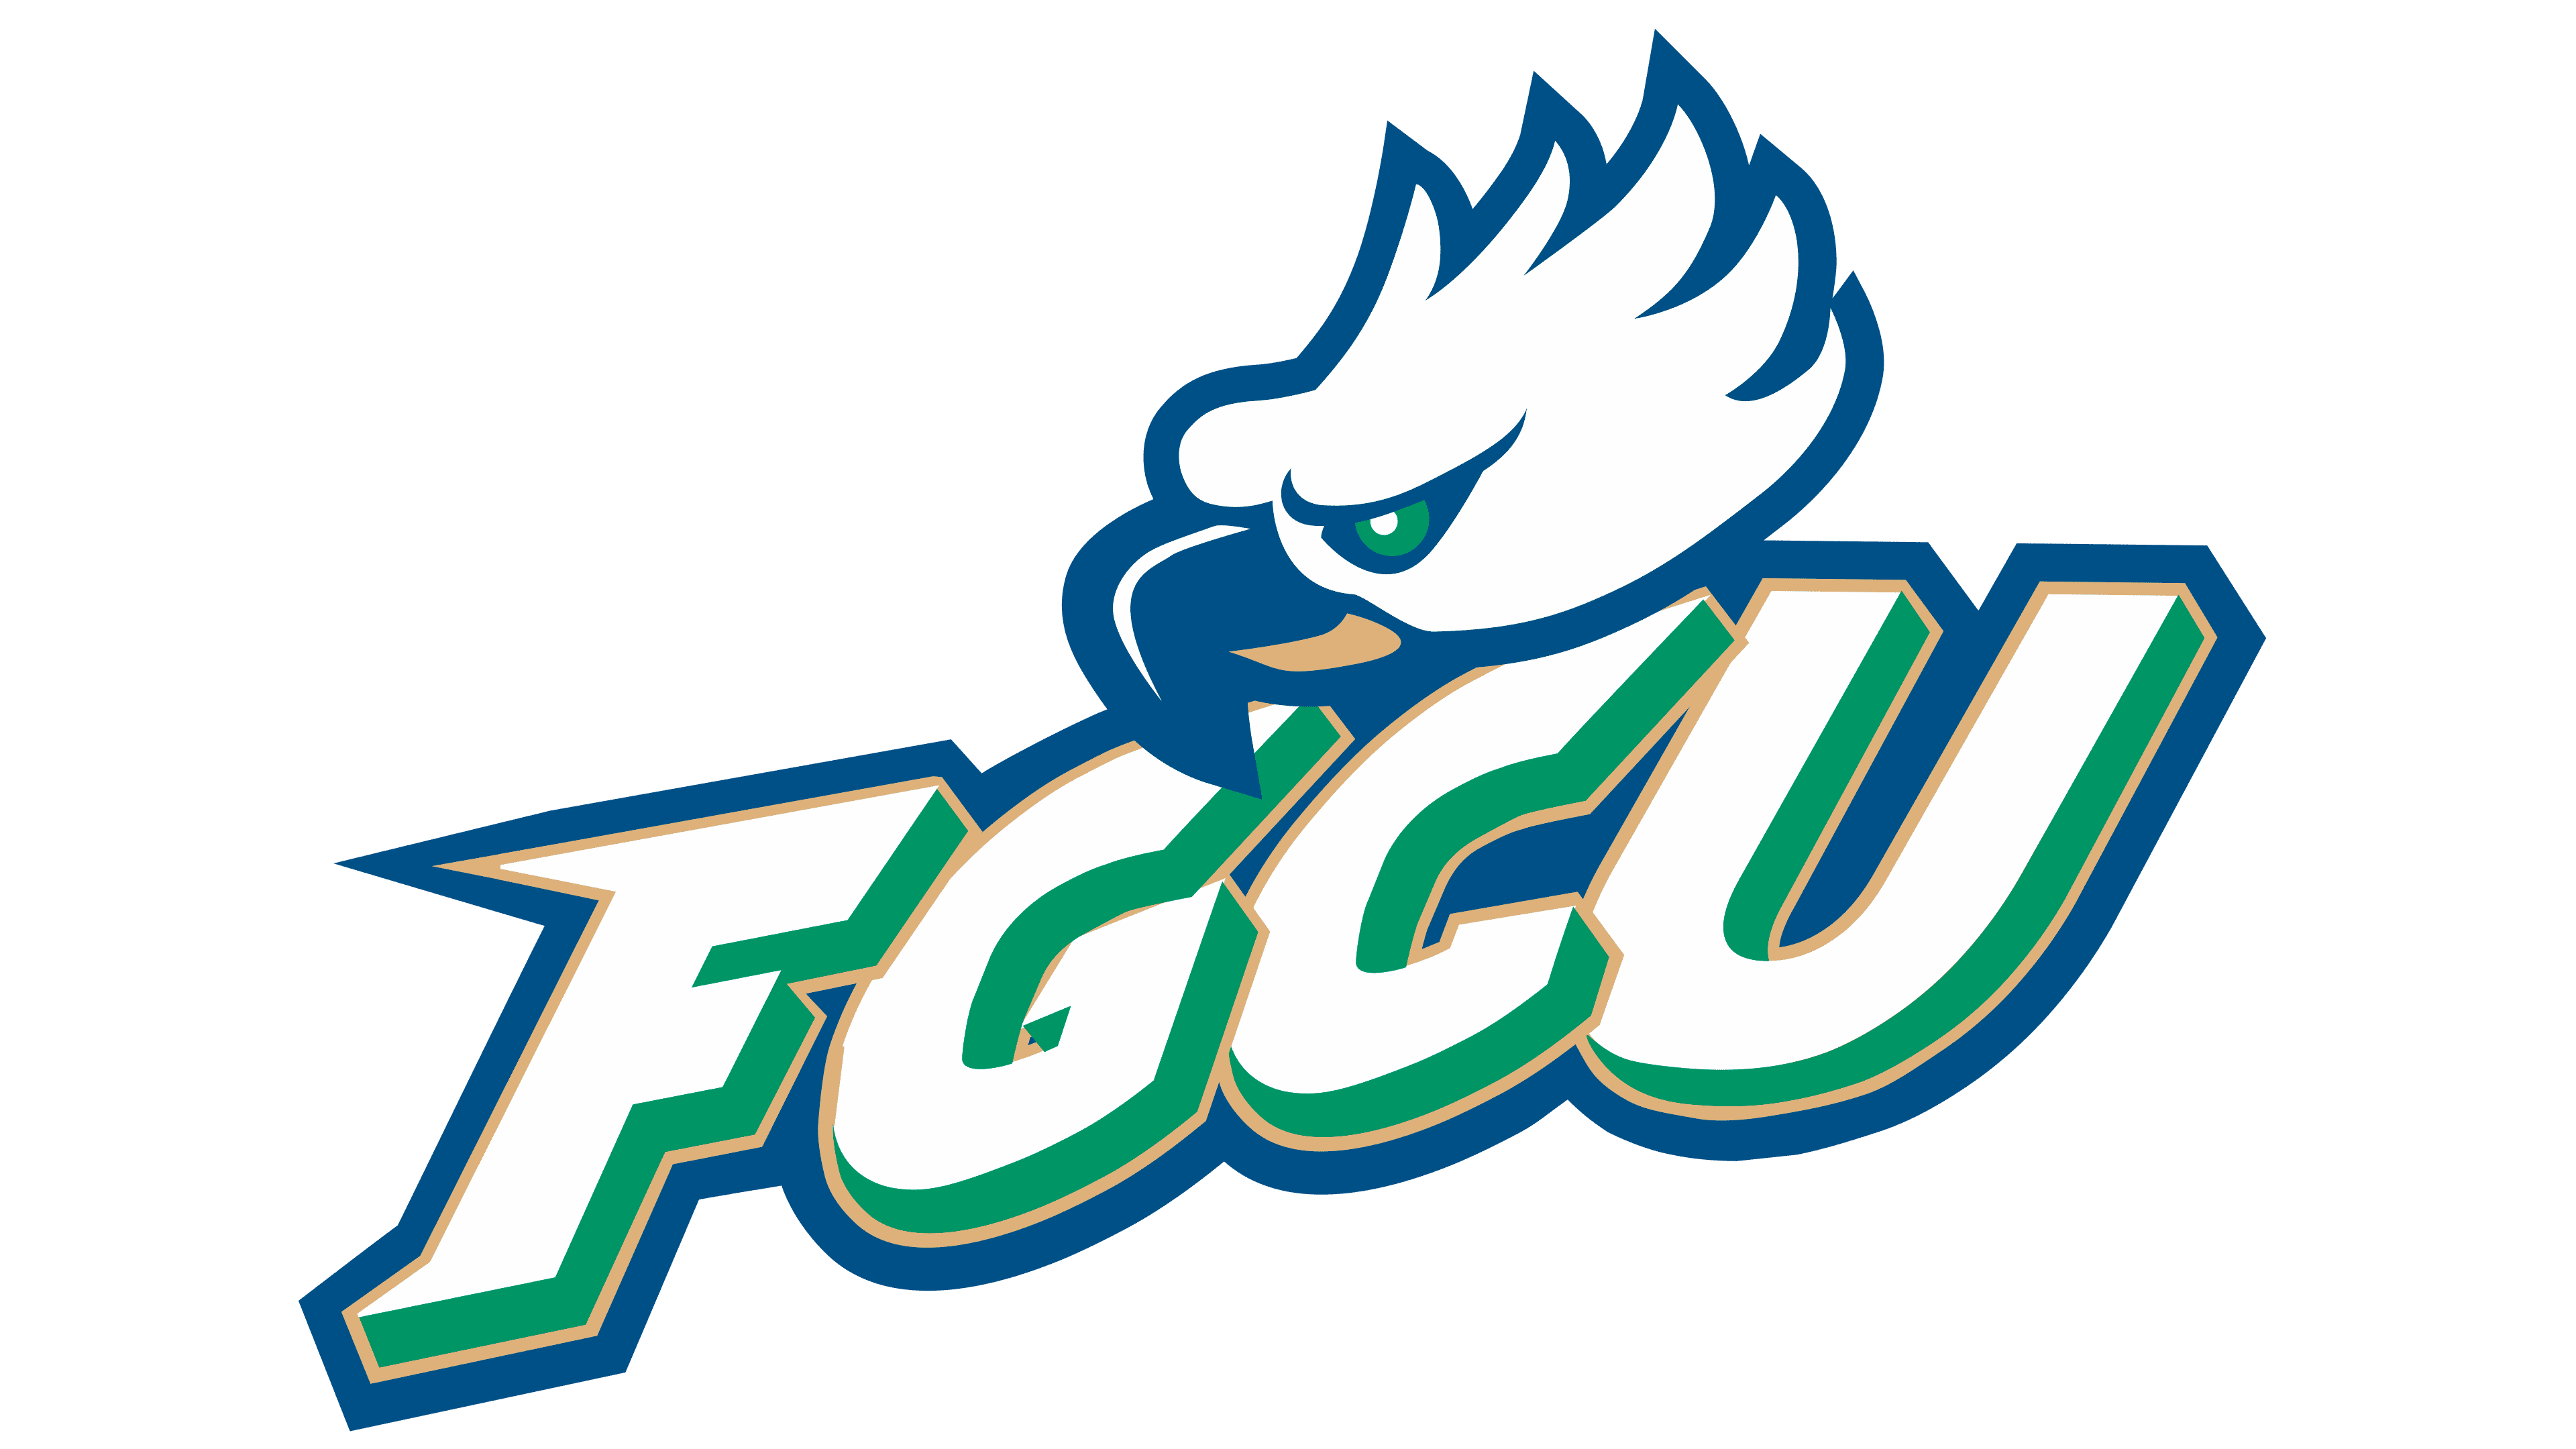 Florida Gulf Coast Eagles Logo The Most Famous Brands And Company Logos In The World